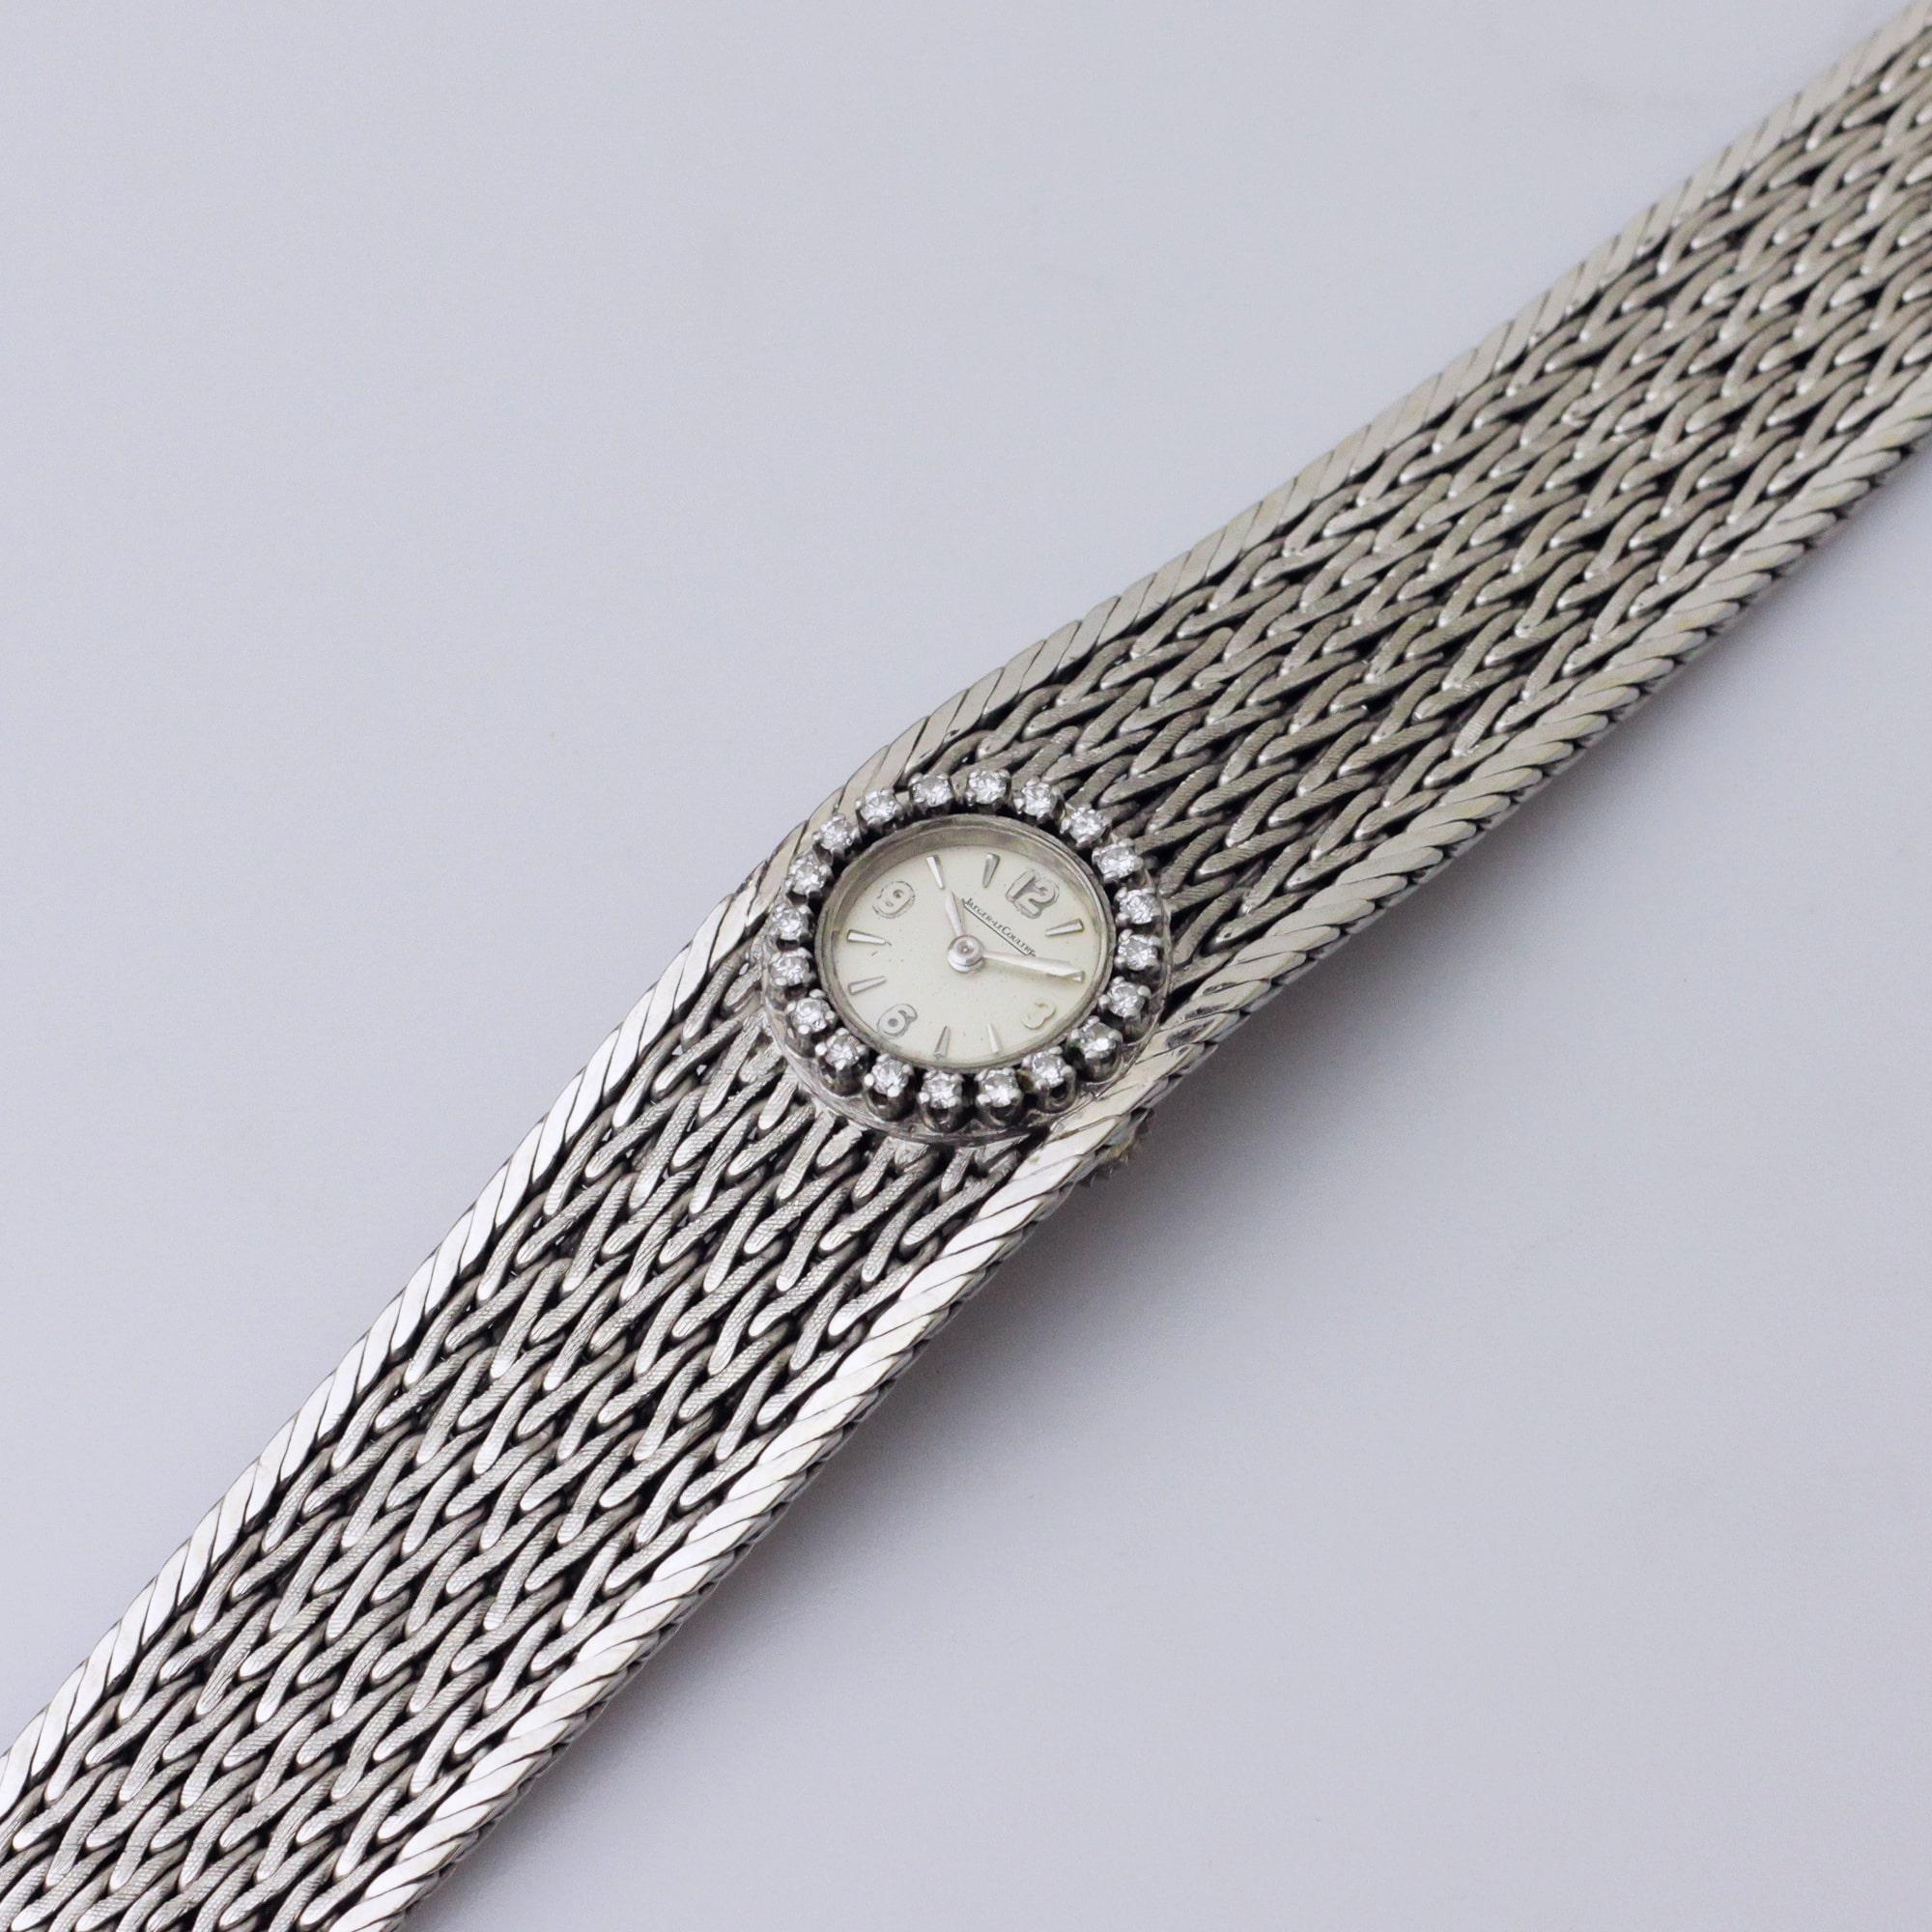 An exceptional ladies dress watch by Swiss horologists, Jaeger-LeCoultre. This masterpiece is integrated into a solid 18 karat white gold bracelet taking a watch and turning it into a piece of ladies fine jewellery. The bracelet is woven brushed